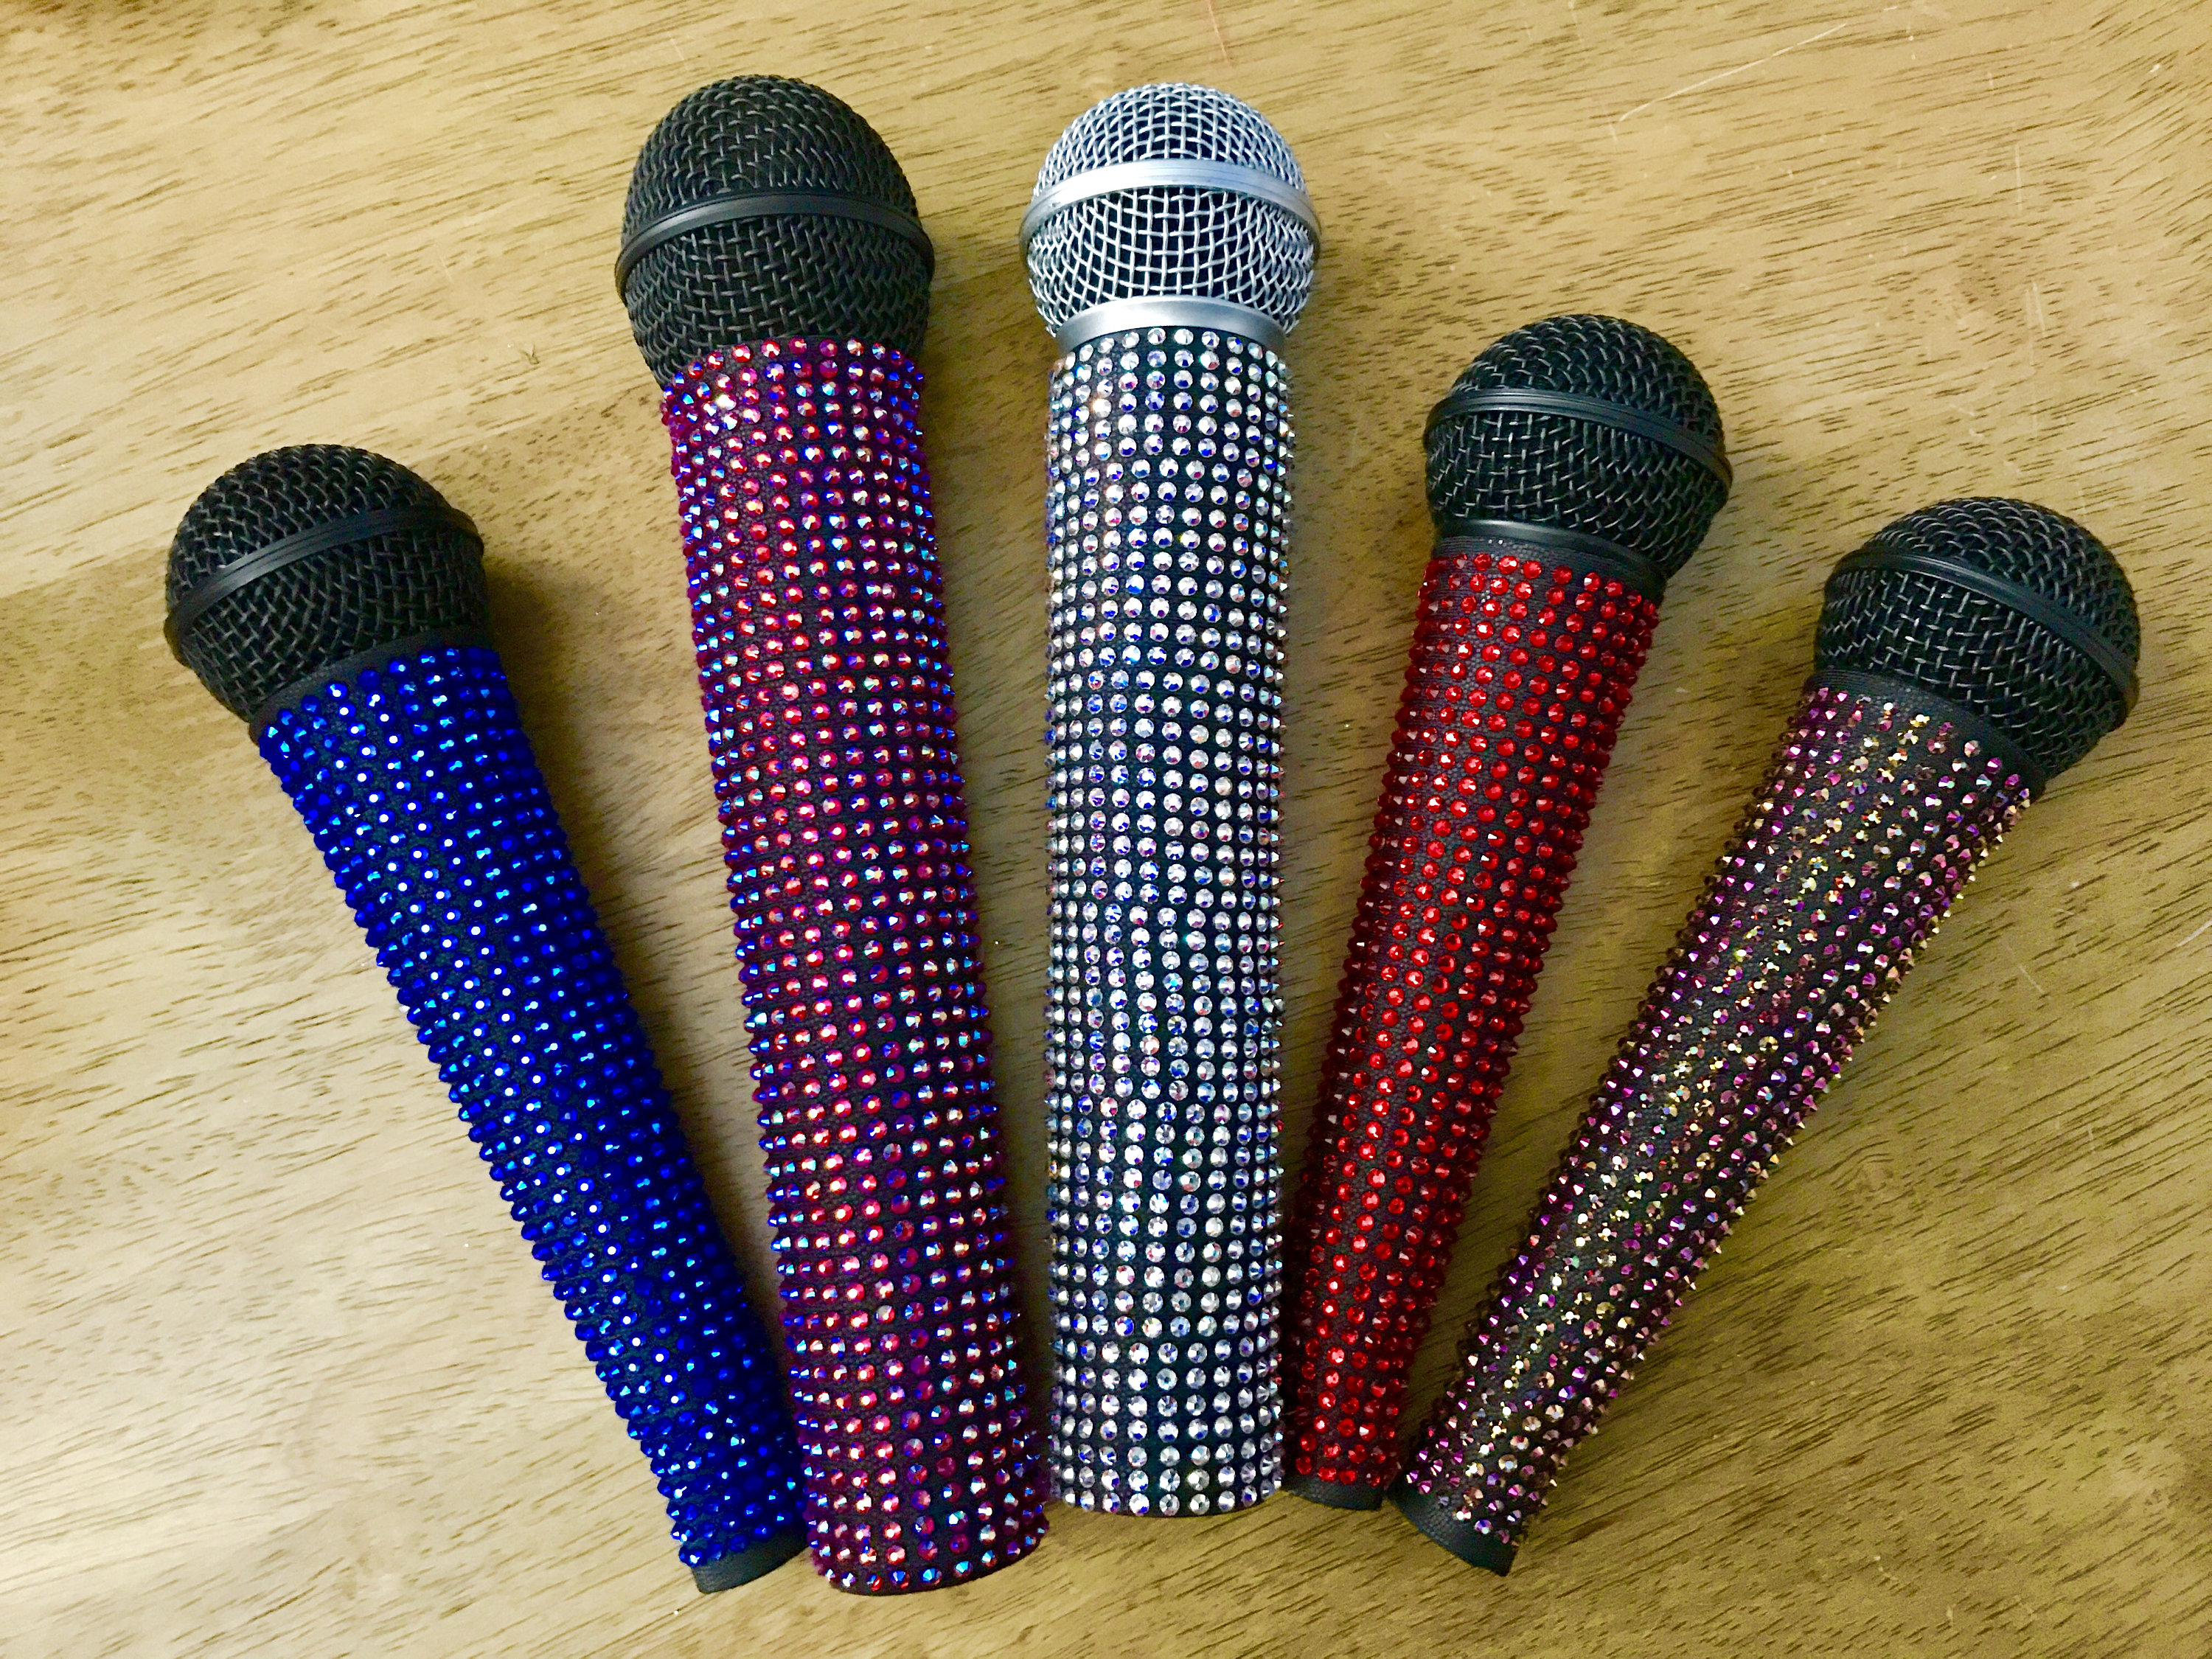 10. Solid Color Rhinestone Microphone Sleeve Cover